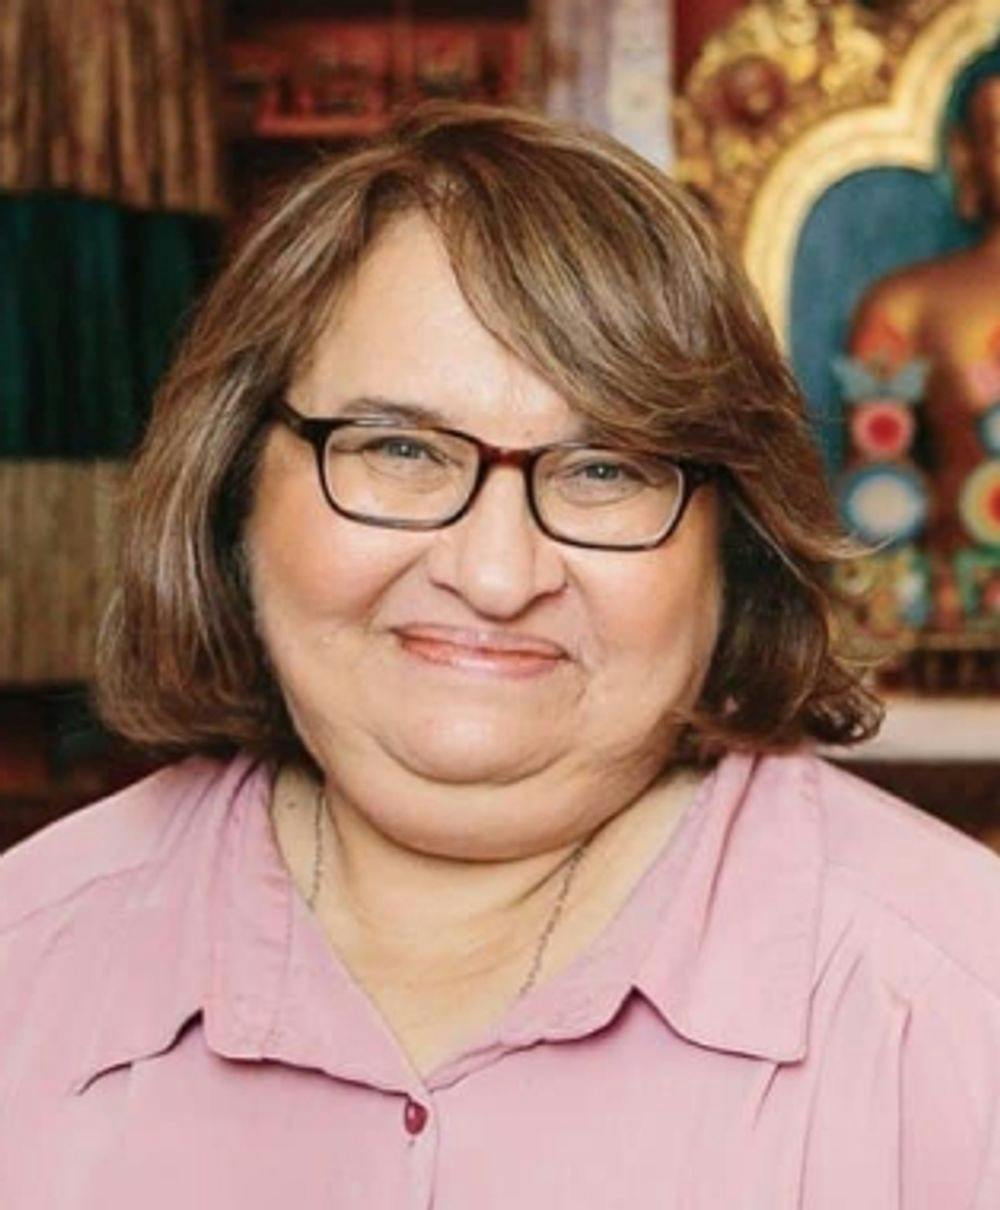 Sharon Salzberg - Sharon Salzberg is a central figure in the field of meditation, a world-renowned teacher and NY Times bestselling author